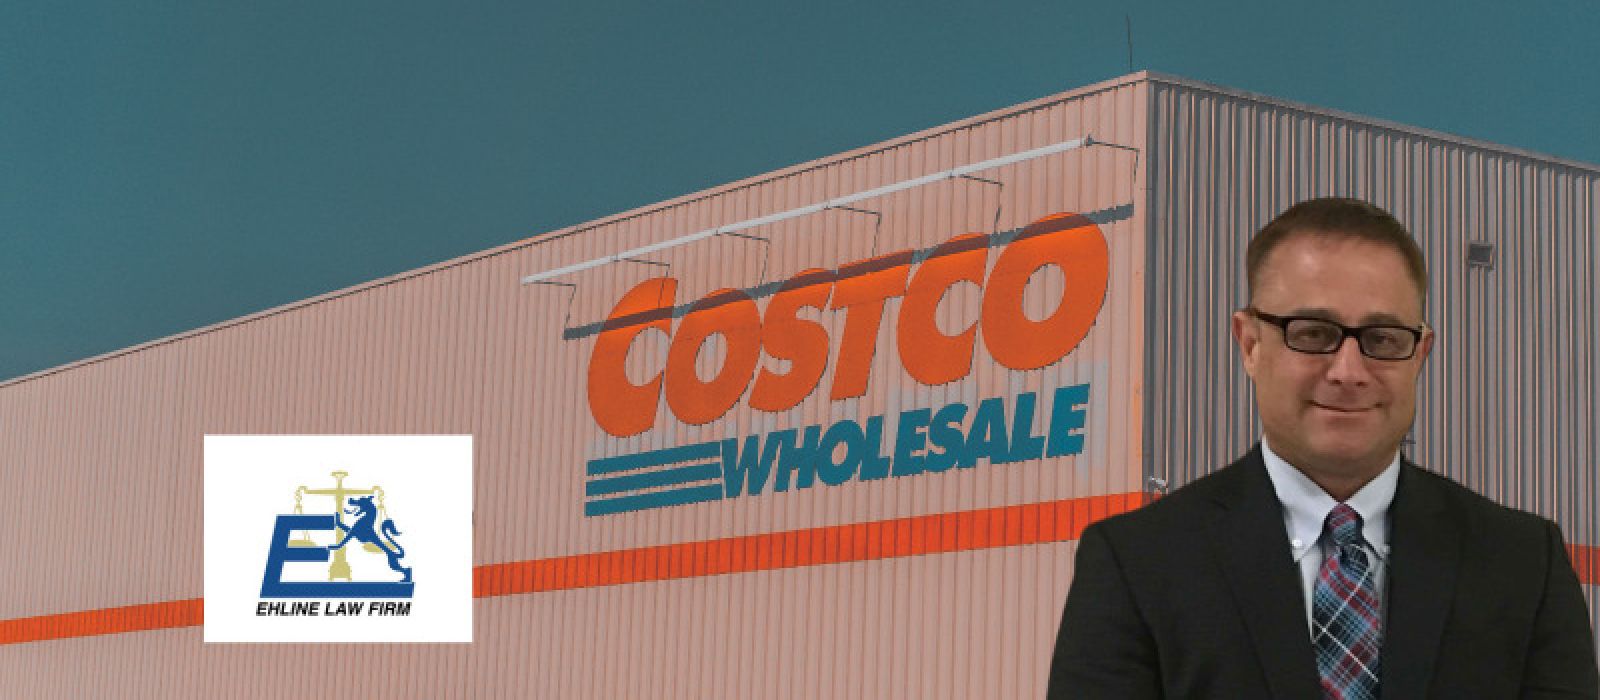 Injury Attorneys for Slip and Fall Accidents at Costco